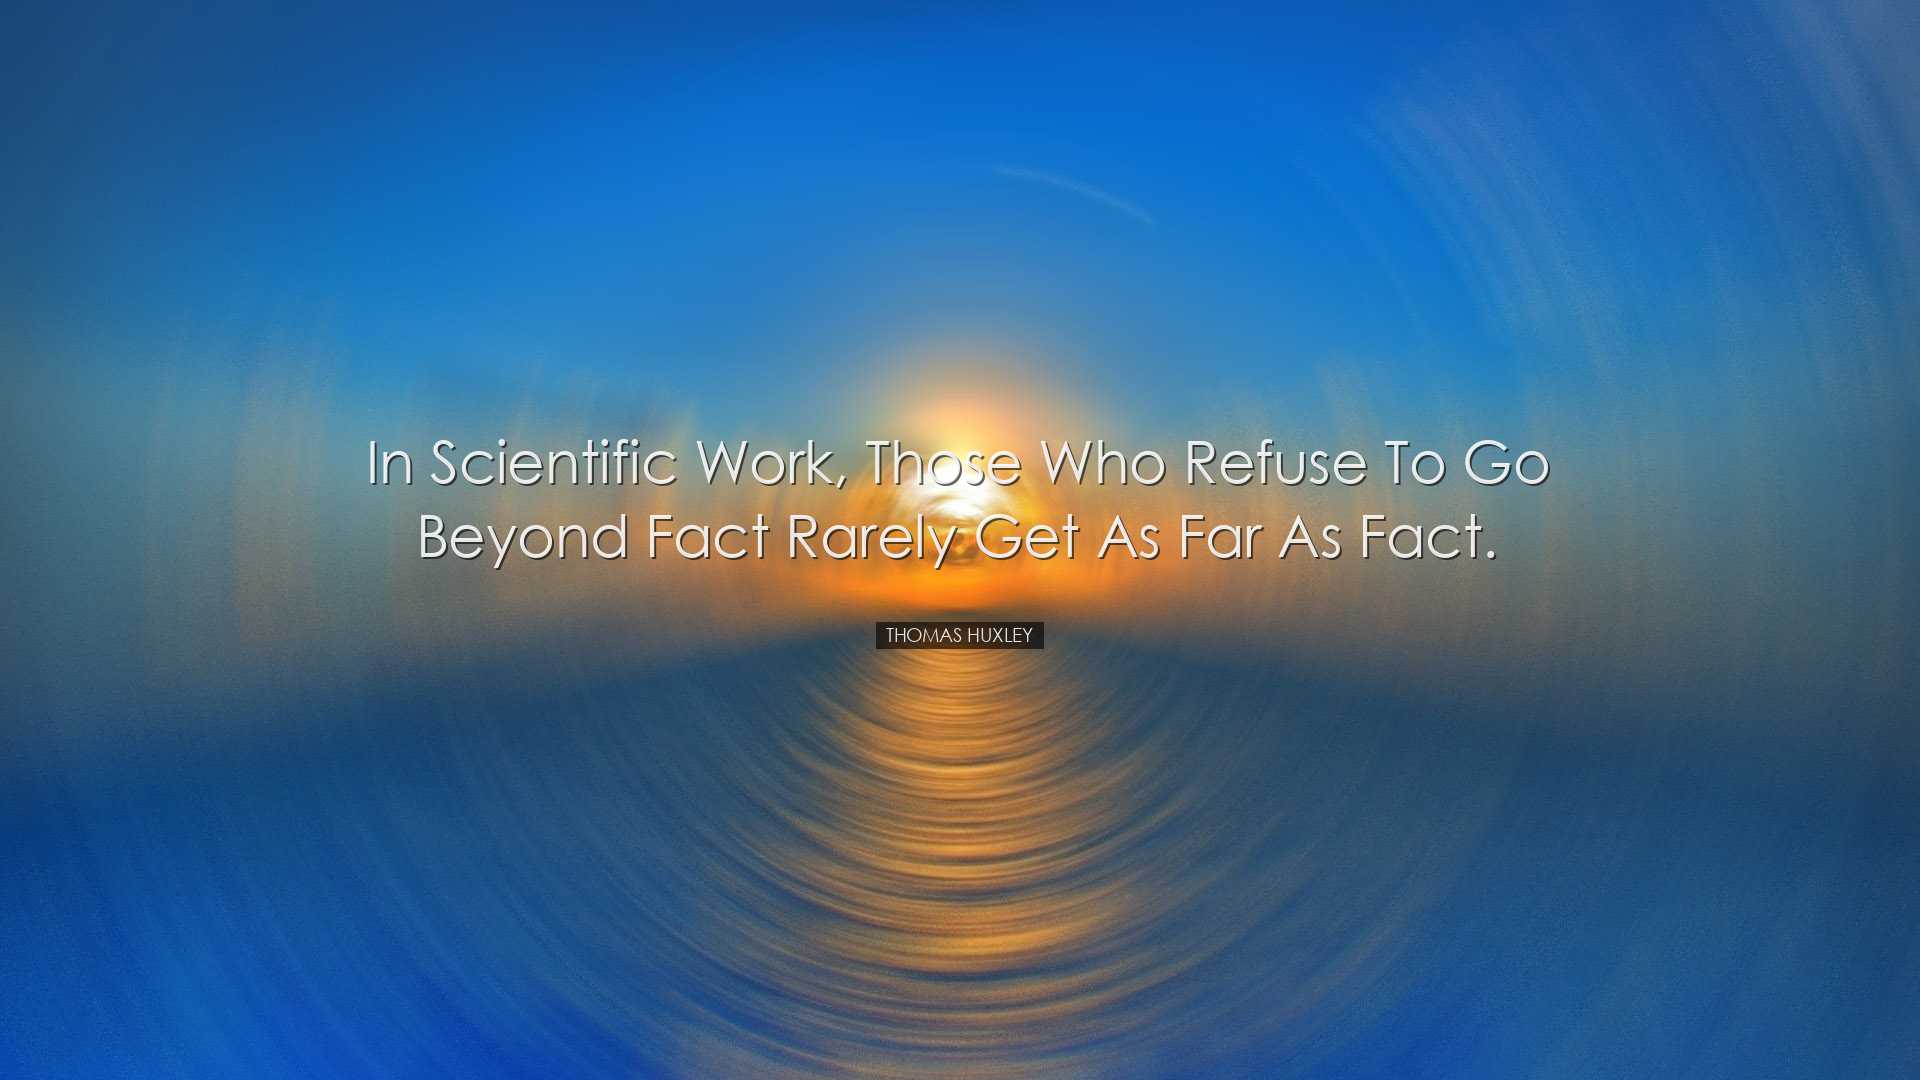 In scientific work, those who refuse to go beyond fact rarely get